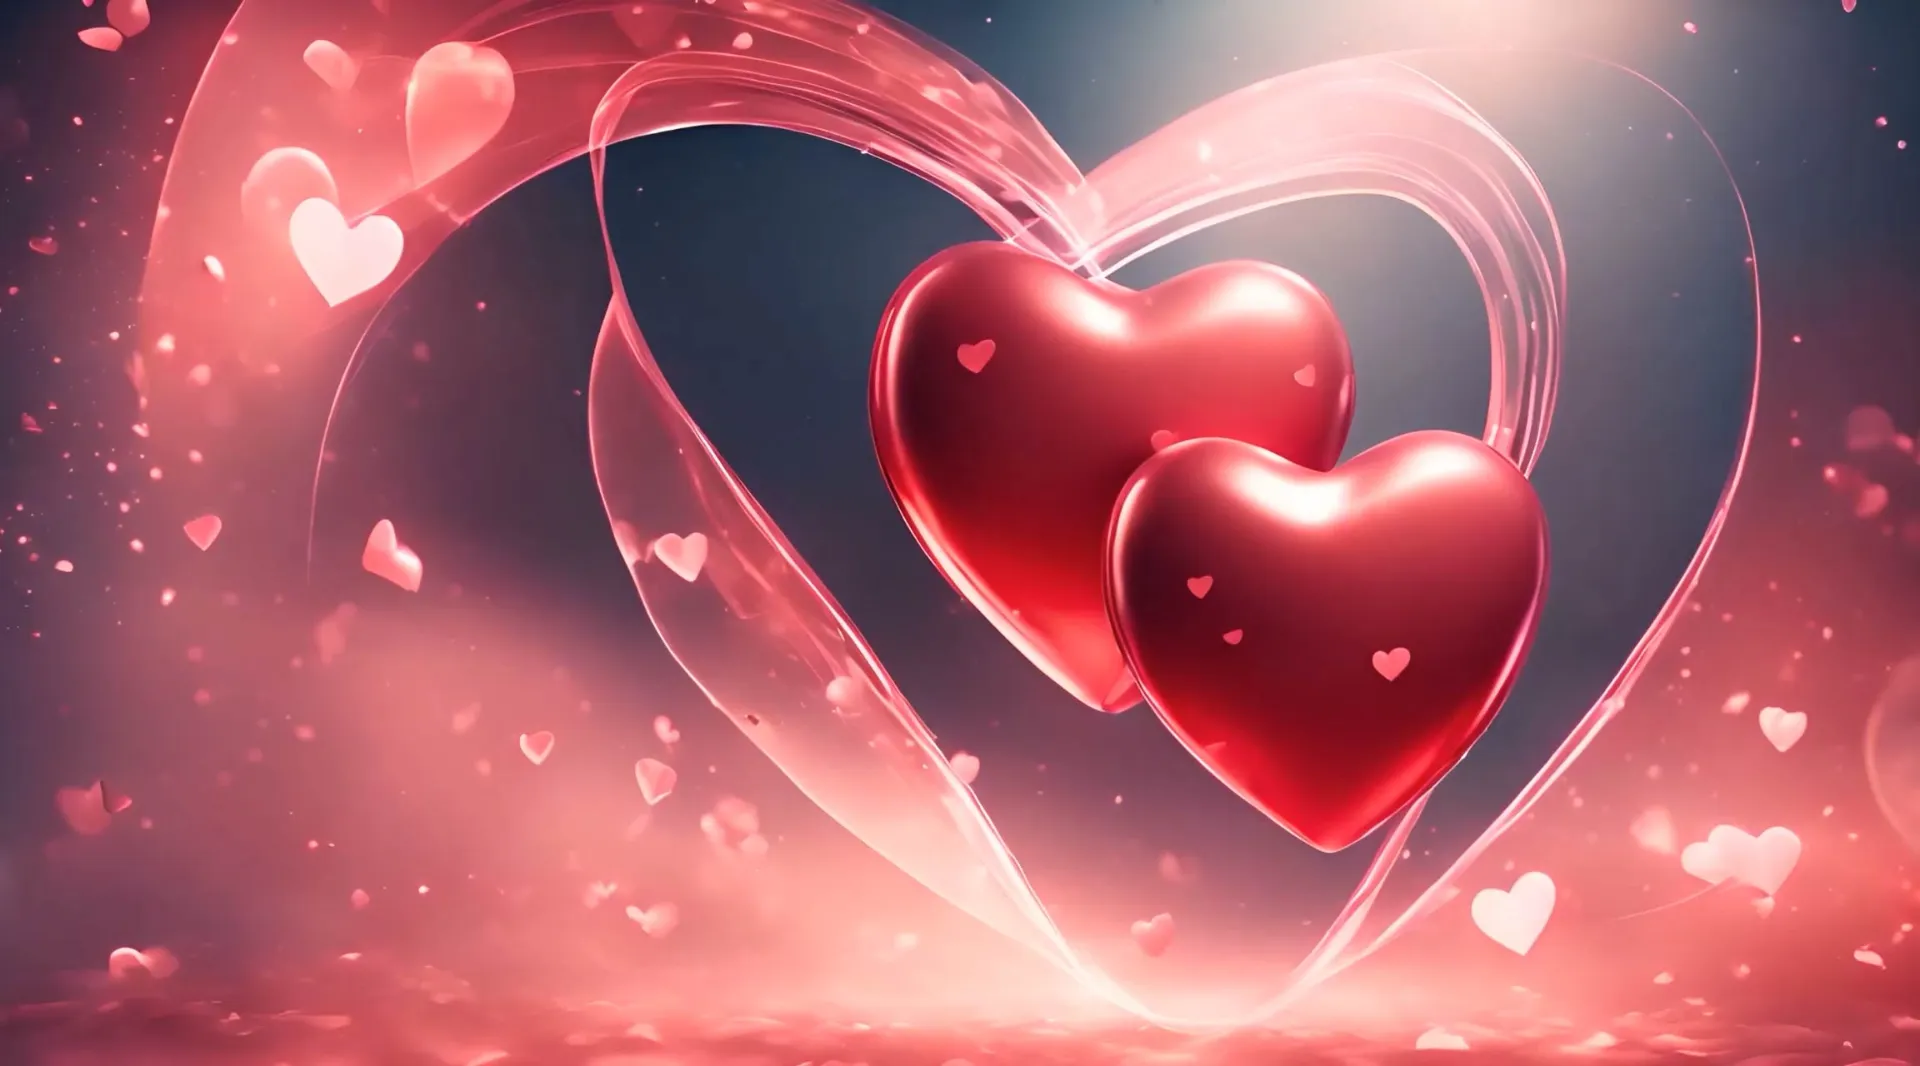 Valentine's Dream Swirling Hearts and Sparkles Stock Video